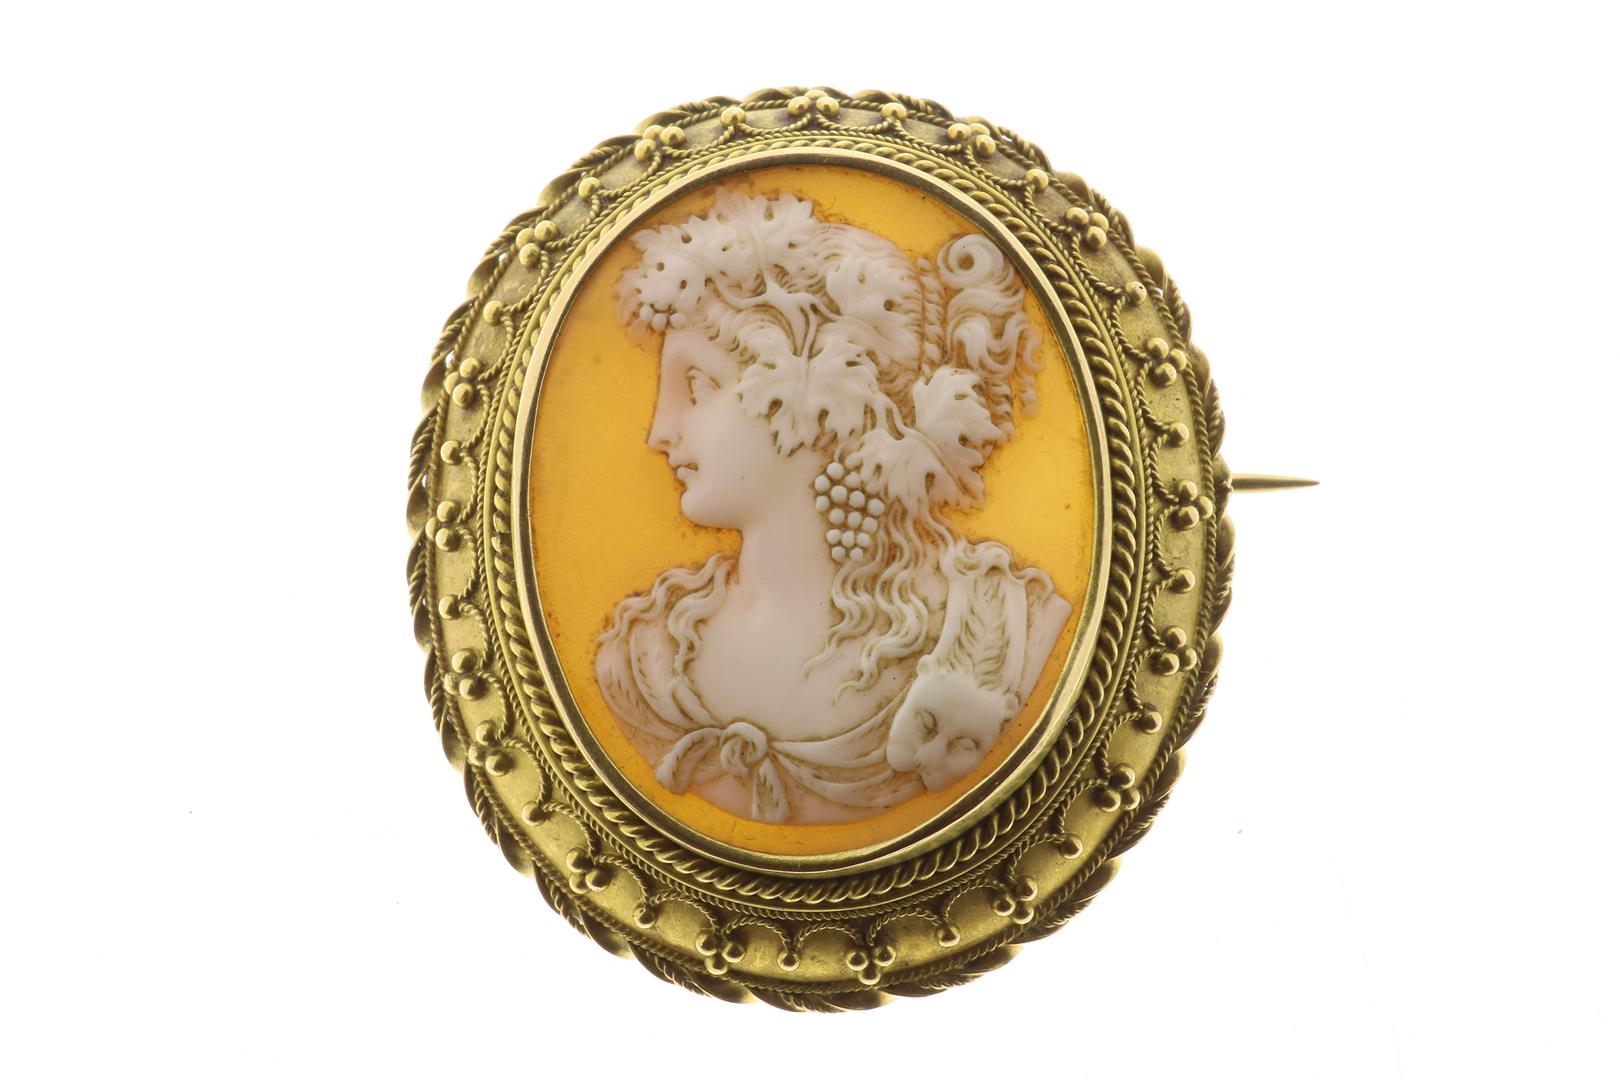 Cameo mounted in gold filigree decorated oval frame, with image of Vertumnus (goddess of autumn)